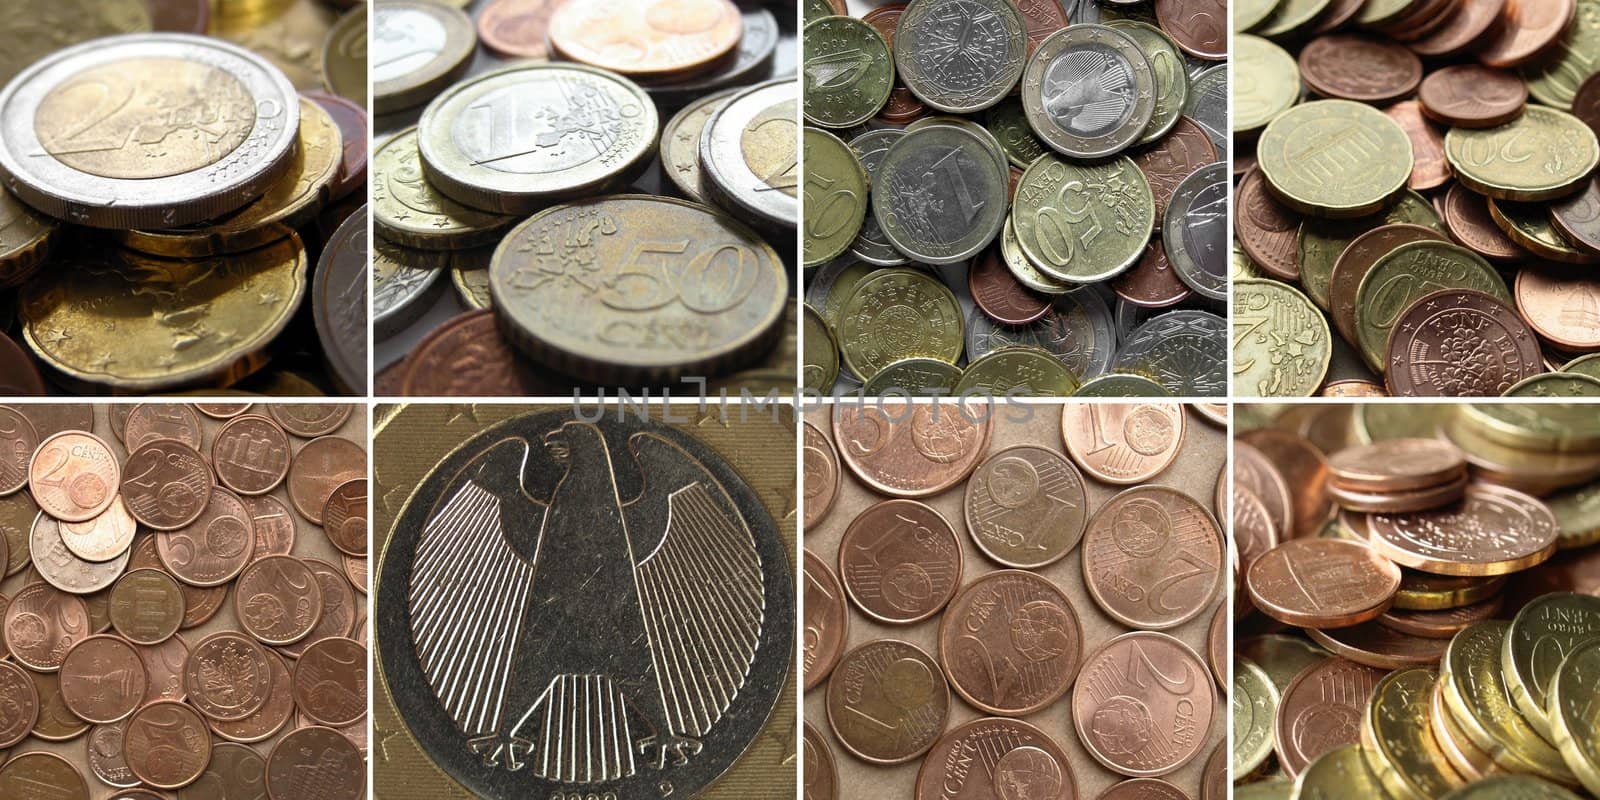 Euro money collage with coins (European currency)